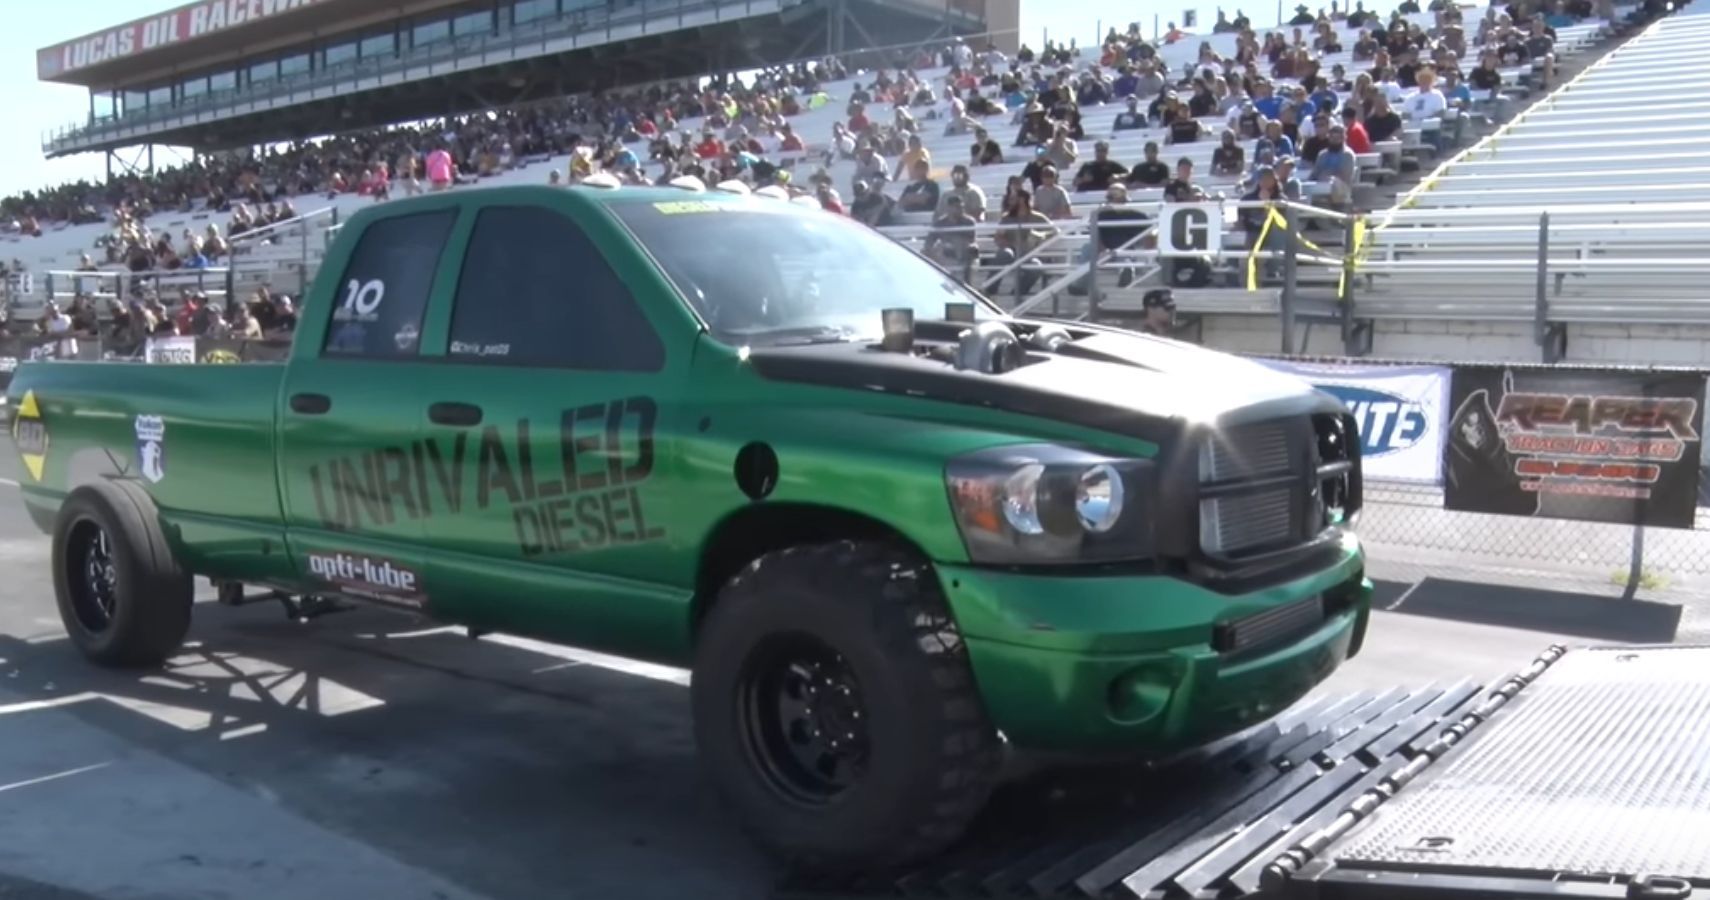 Front quarter view of green 2,600 horsepower Dodge Ram at event